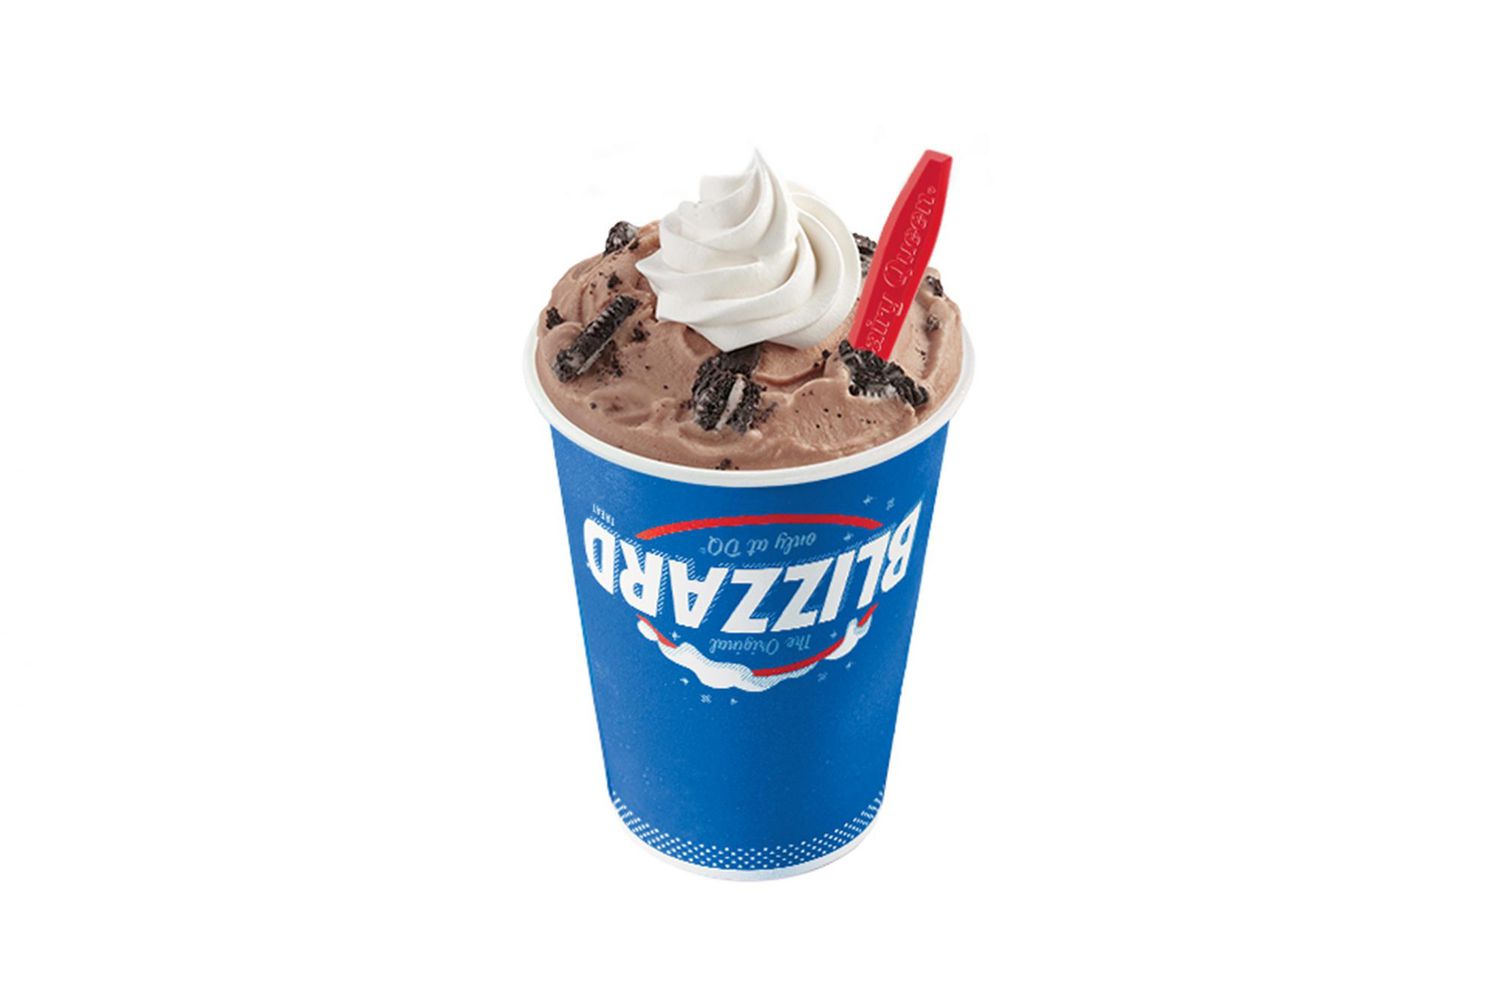 Dairy Queen has released two new Blizzards for the holiday season, includin...